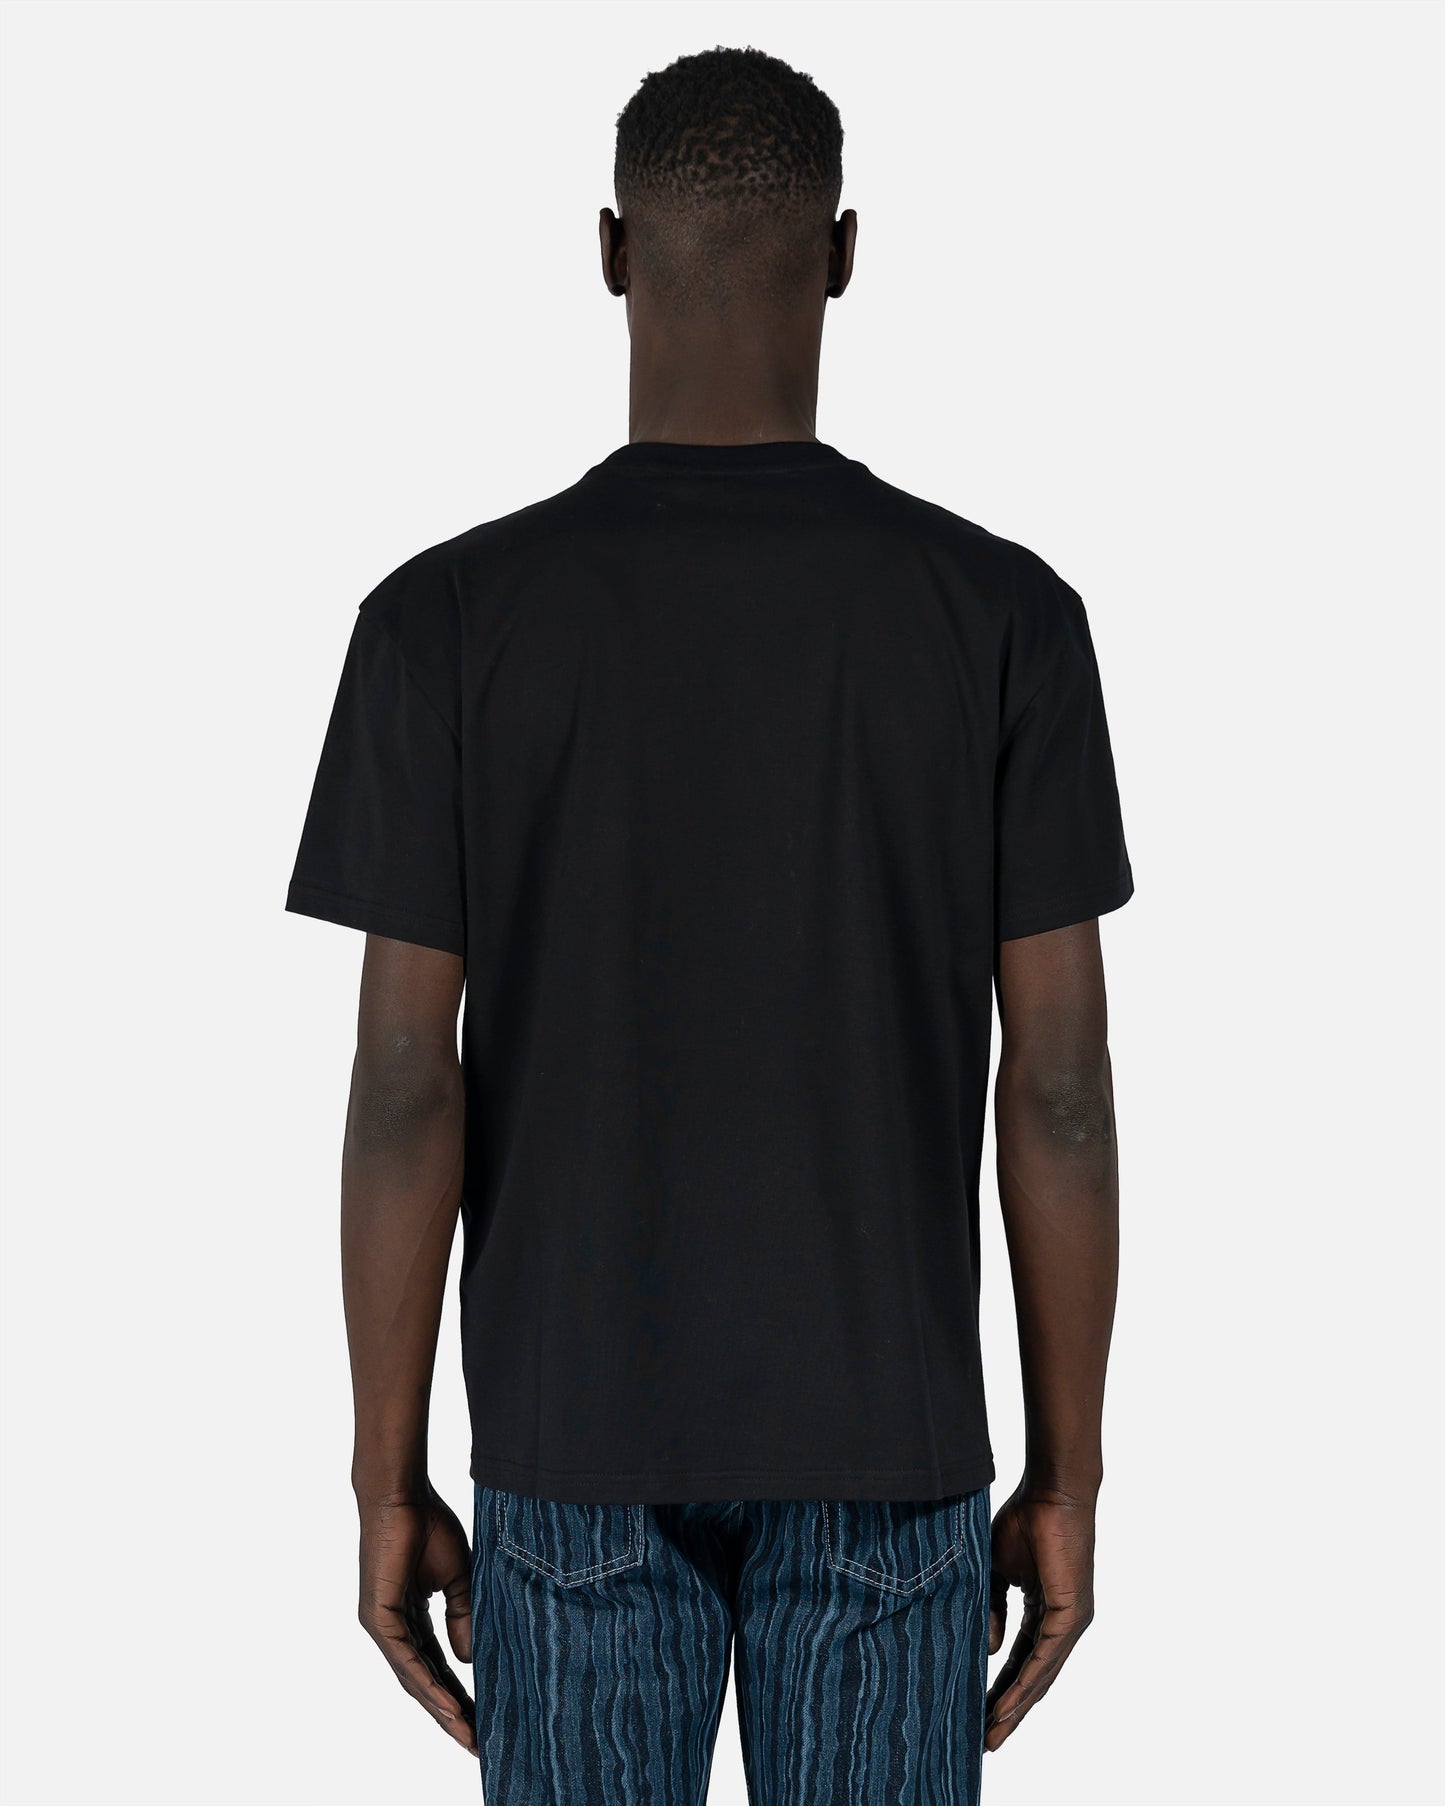 JW Anderson Men's T-Shirts Embroidered Rugby Team T-Shirt in Black